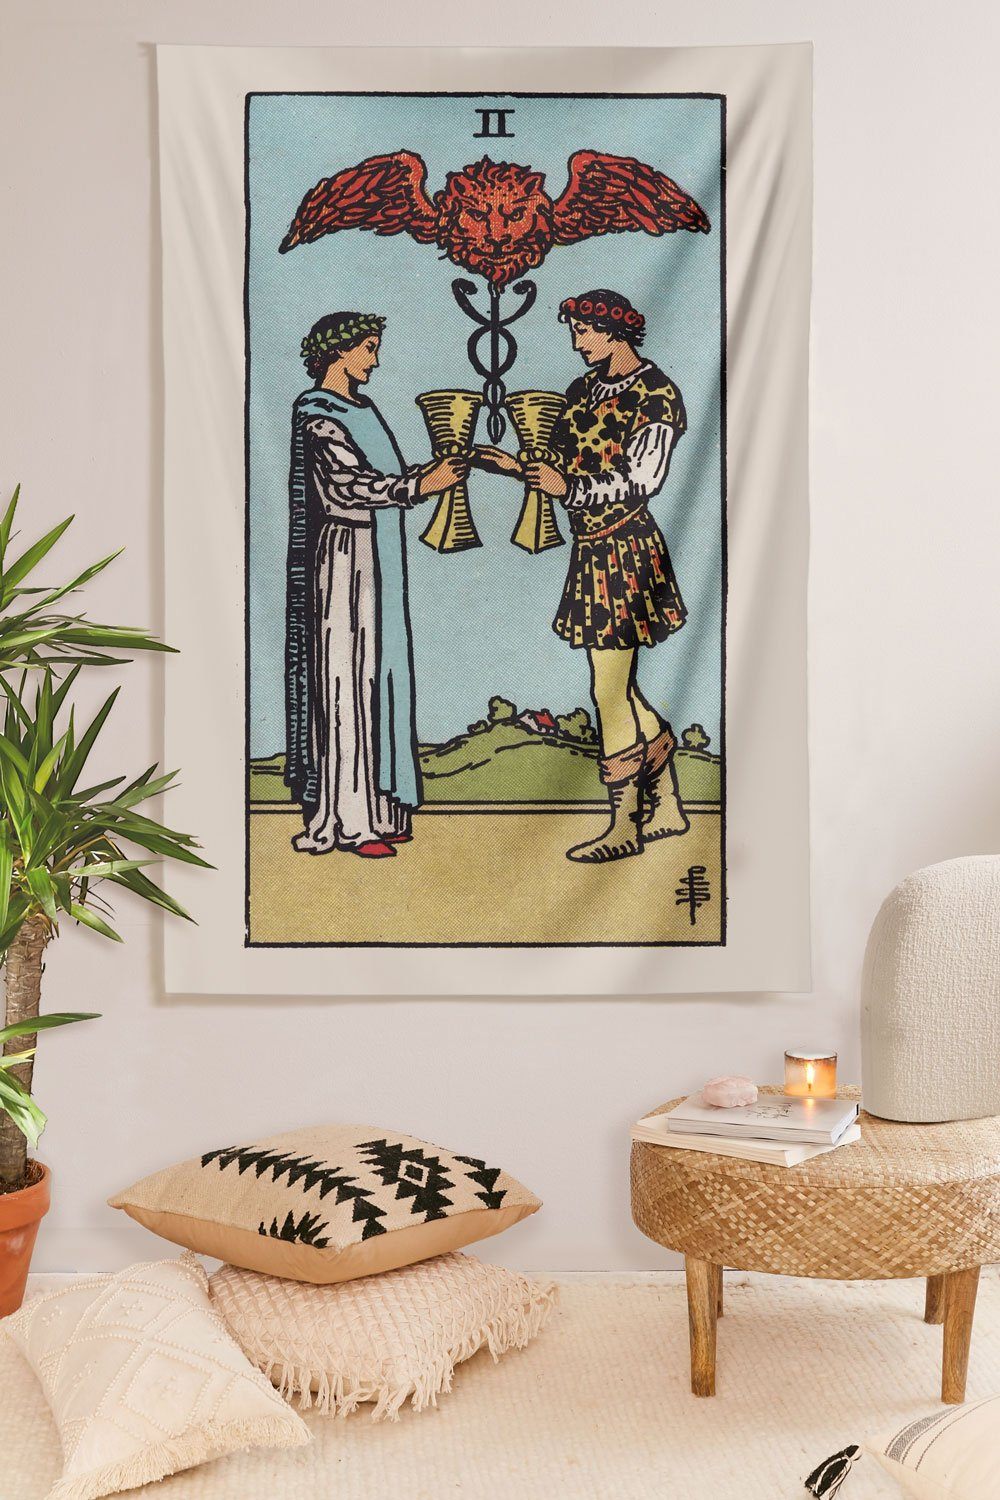 2 of Cups Tapestry tapestry NirvanaThreads 